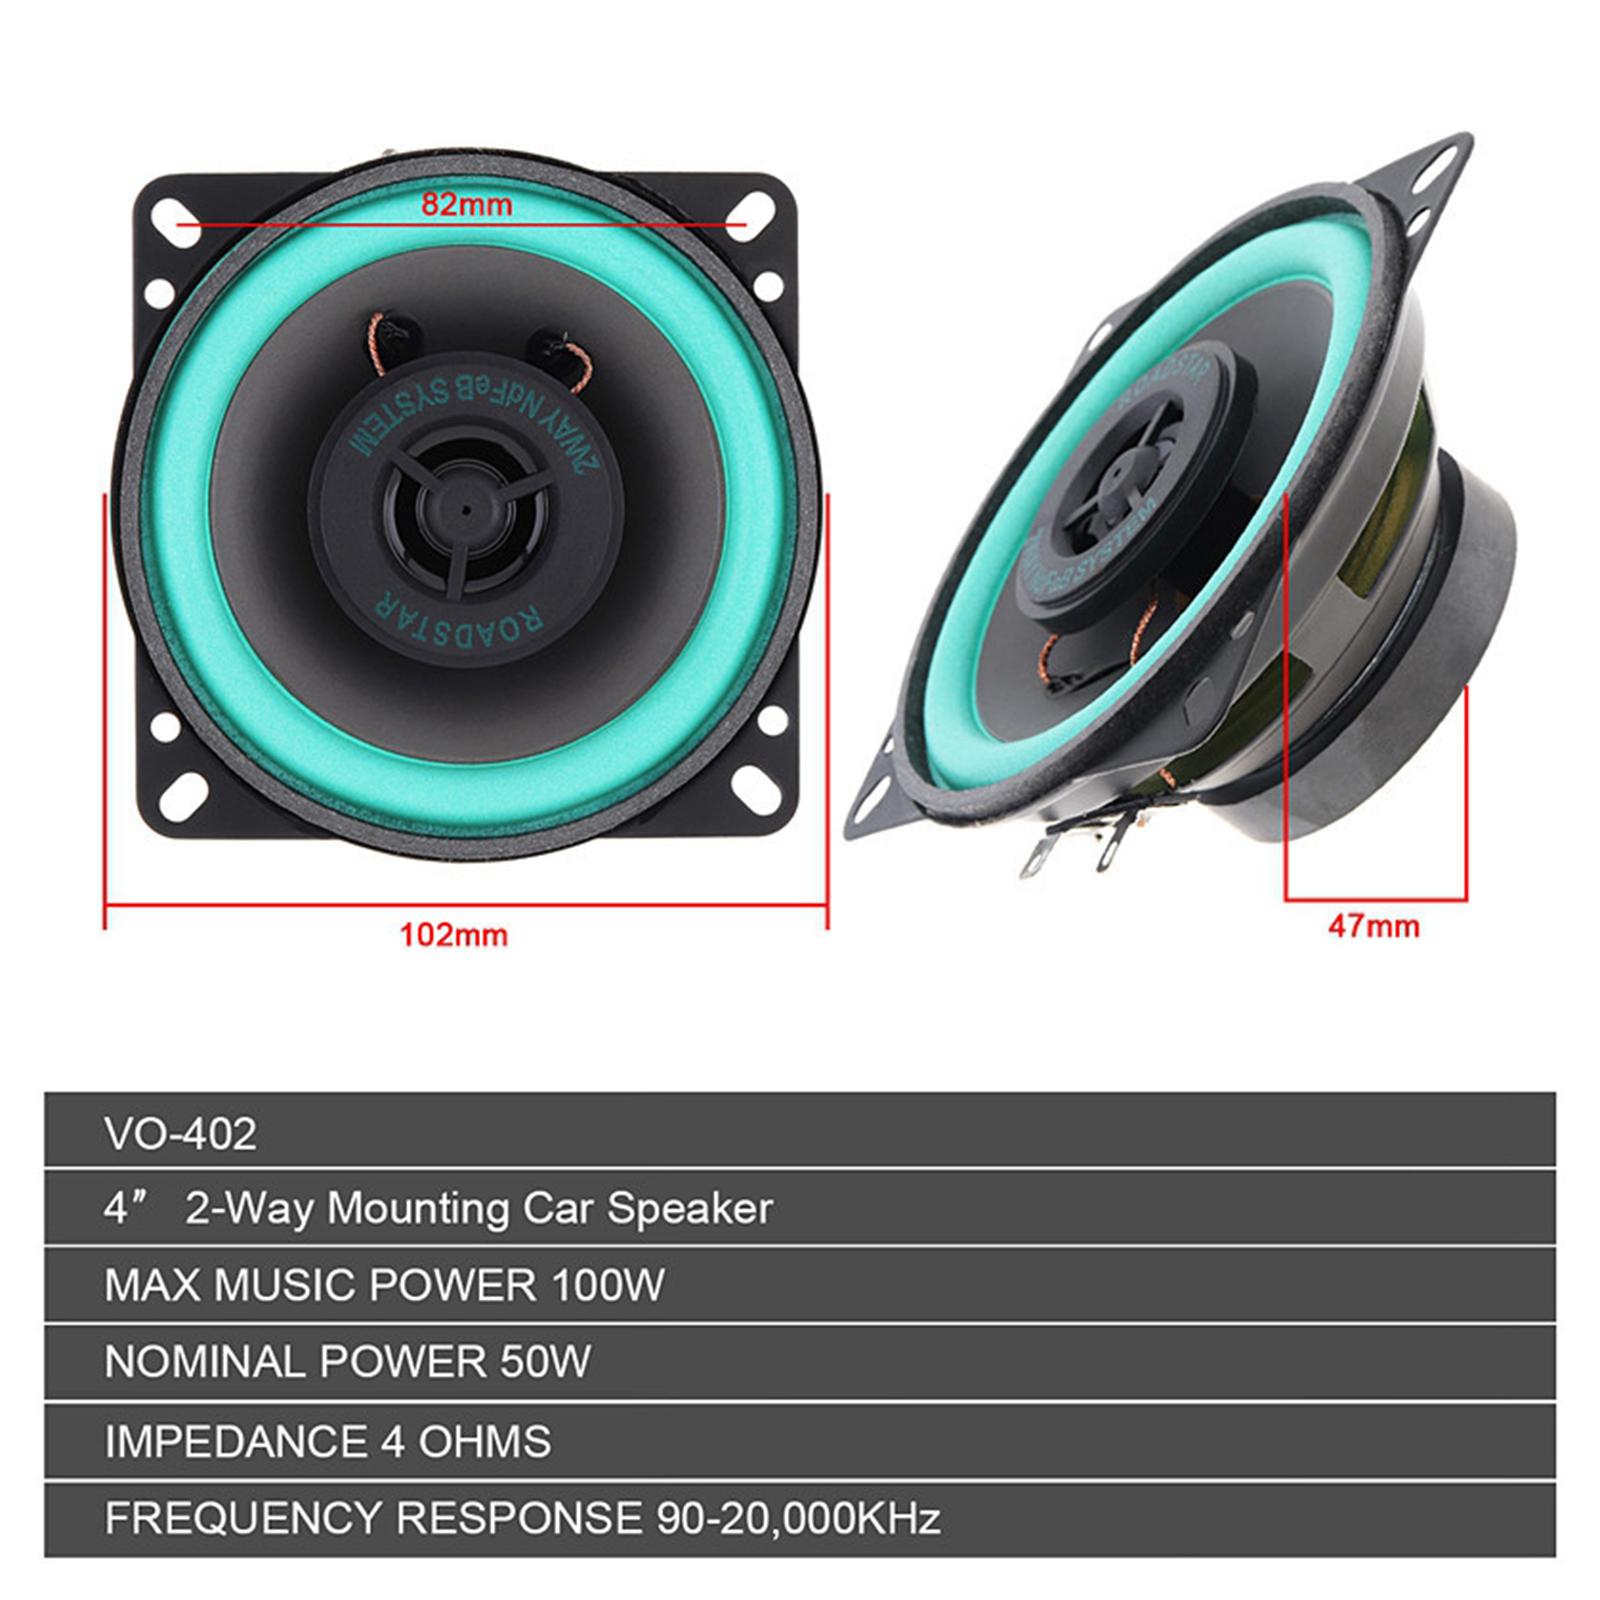 Car Speakers Stereo Full Range with Polypropylene Cone 1pc Replace Enhances car stereo by producing powerful audio sound - VO-402 4 inch 100W - image 4 of 8